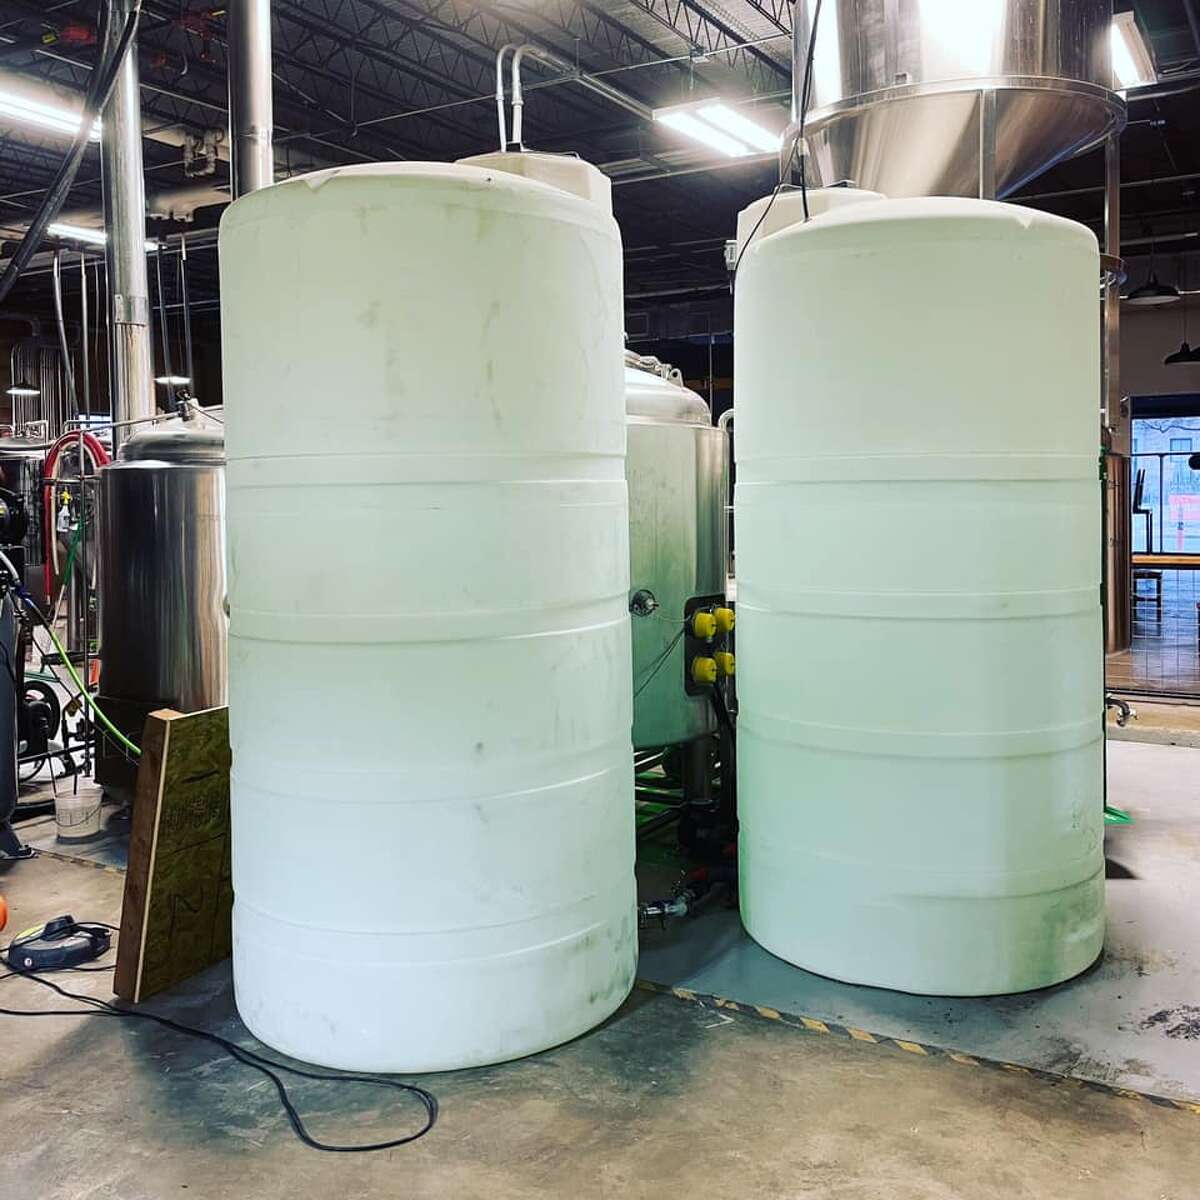 Multiple San Antonio breweries are pitching in to help the community by giving out clean water as the city works to restore pressure in the wake of energy-related issues brought on by winter weather.